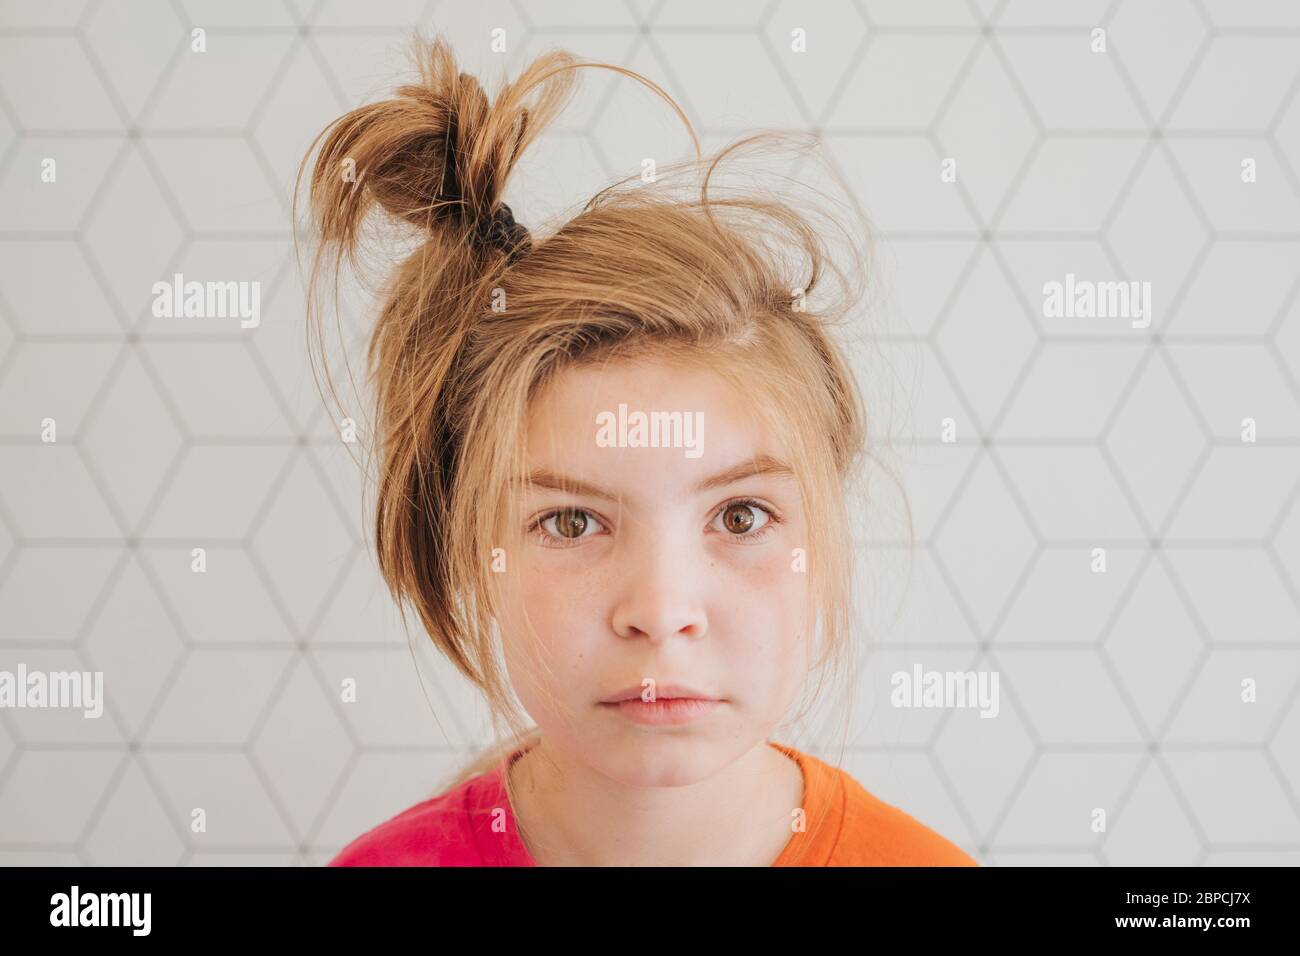 Young girl with hair in a messy bun looking at camera Stock Photo